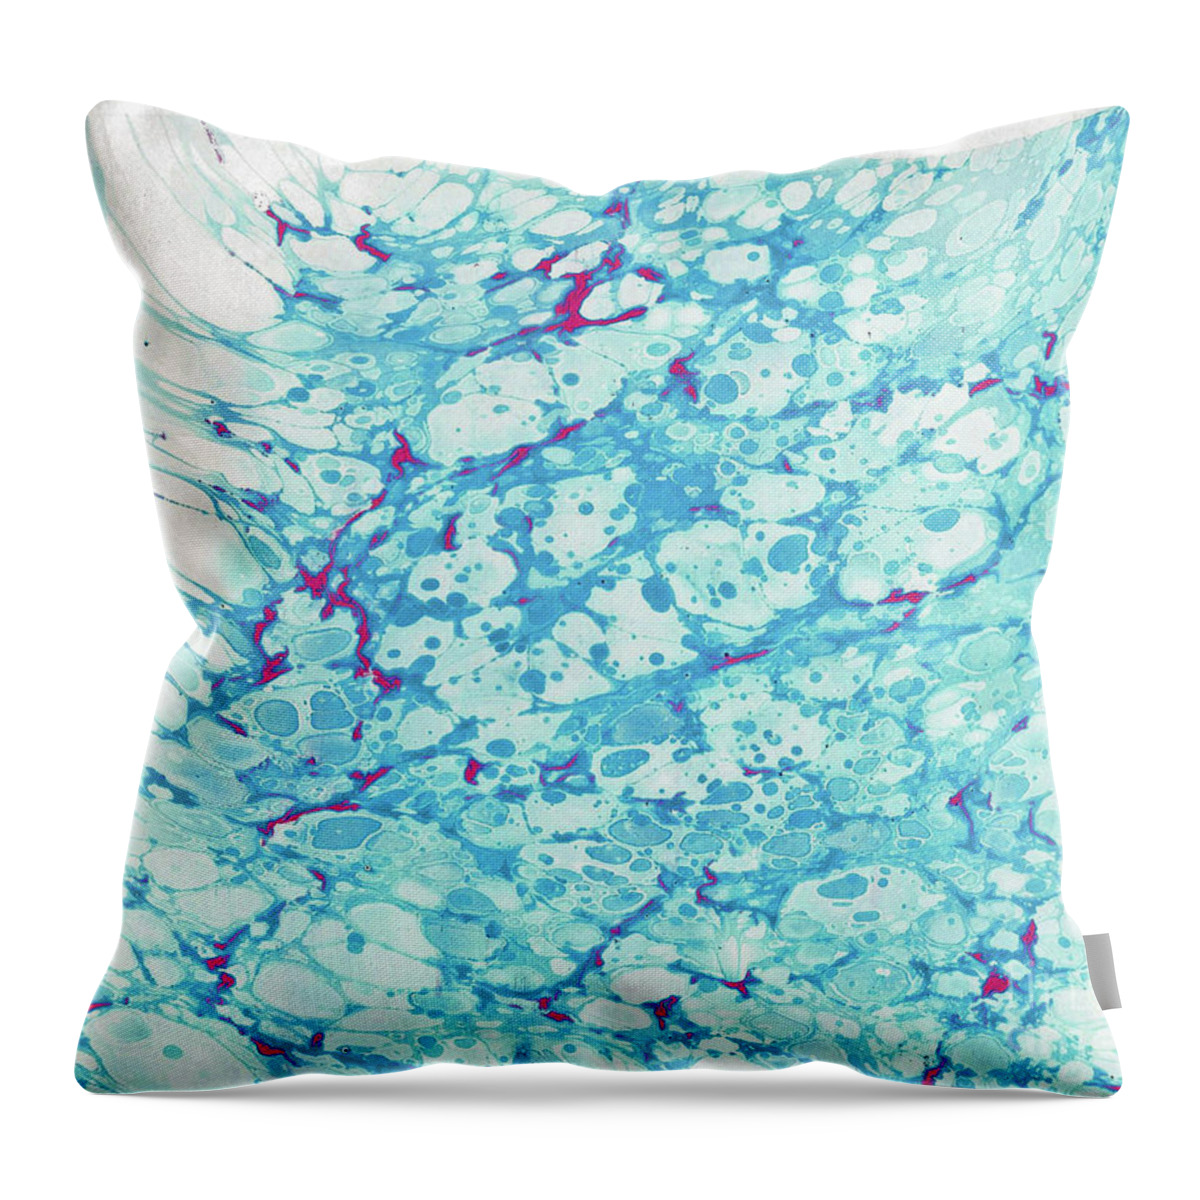 Water Marbling Throw Pillow featuring the painting Blue Tidal Wave by Daniela Easter